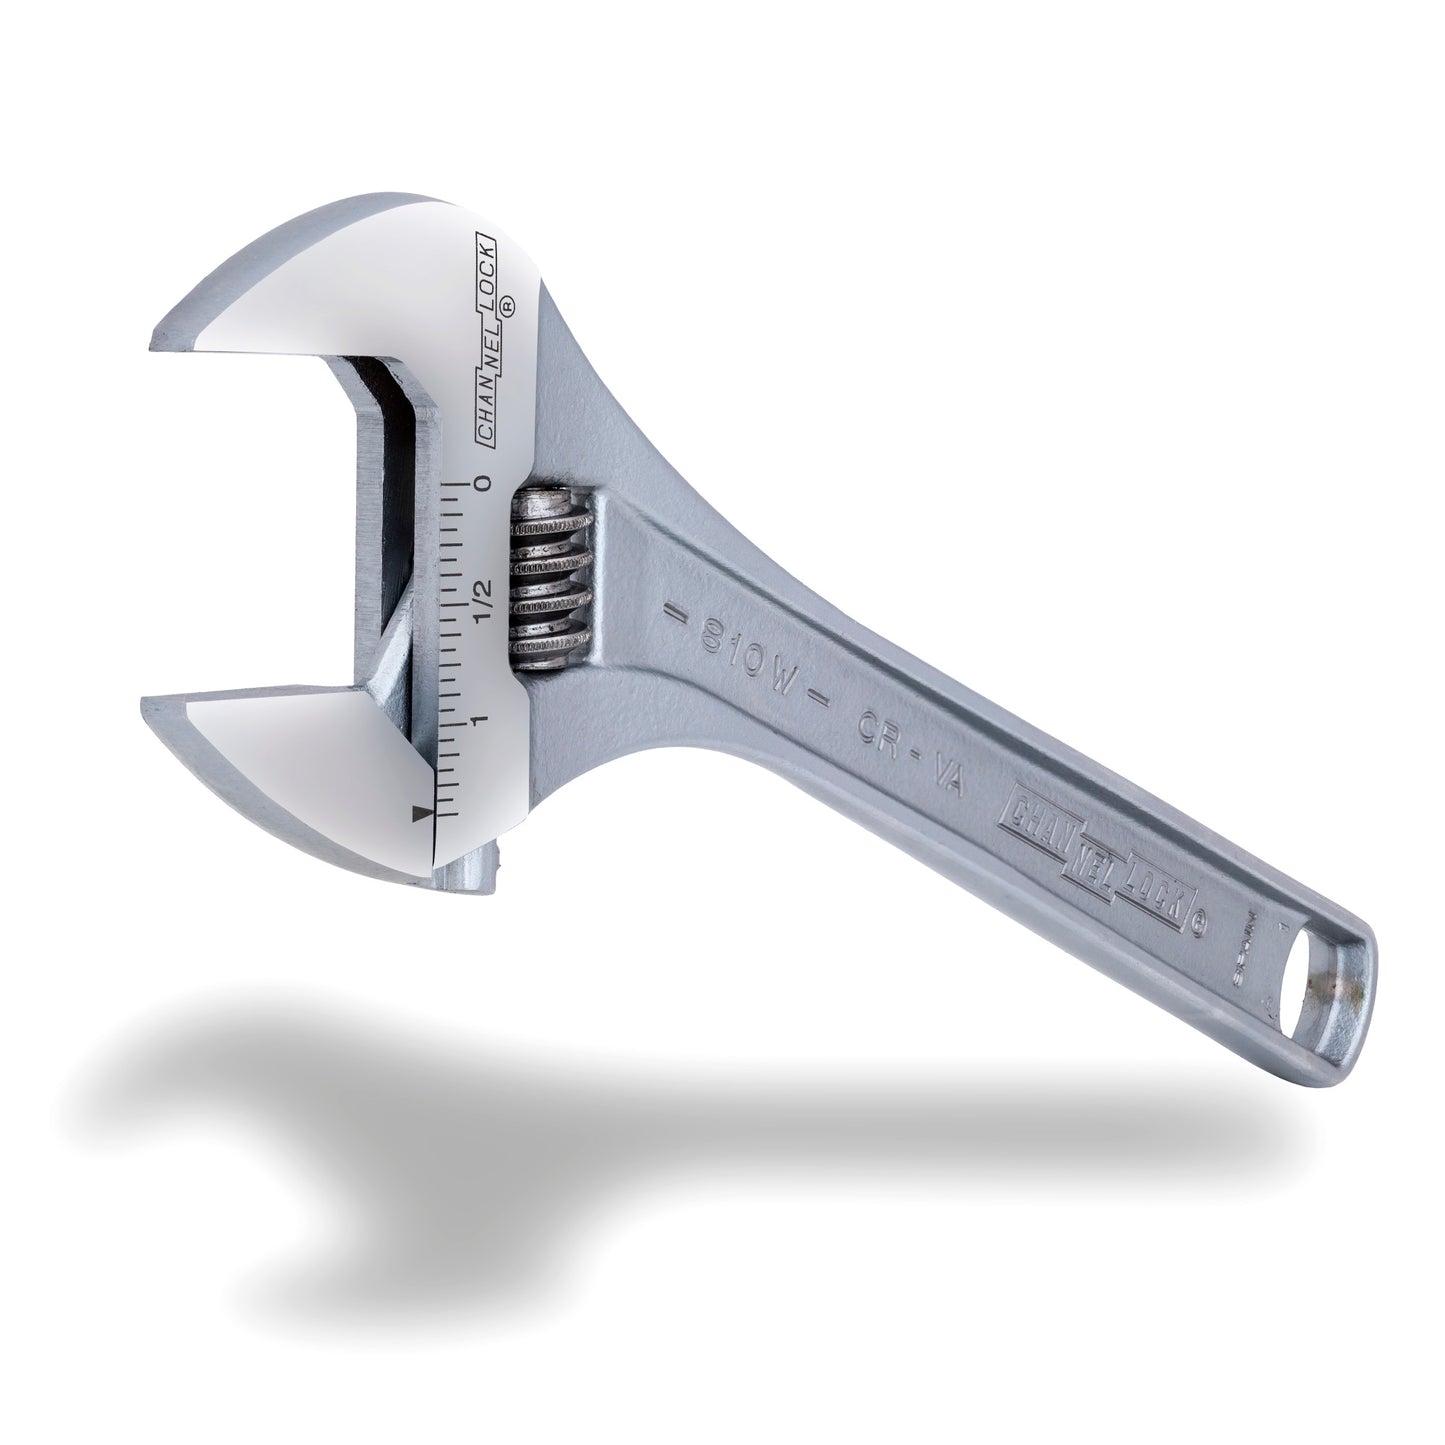 10-inch Adjustable Wrench (810W)